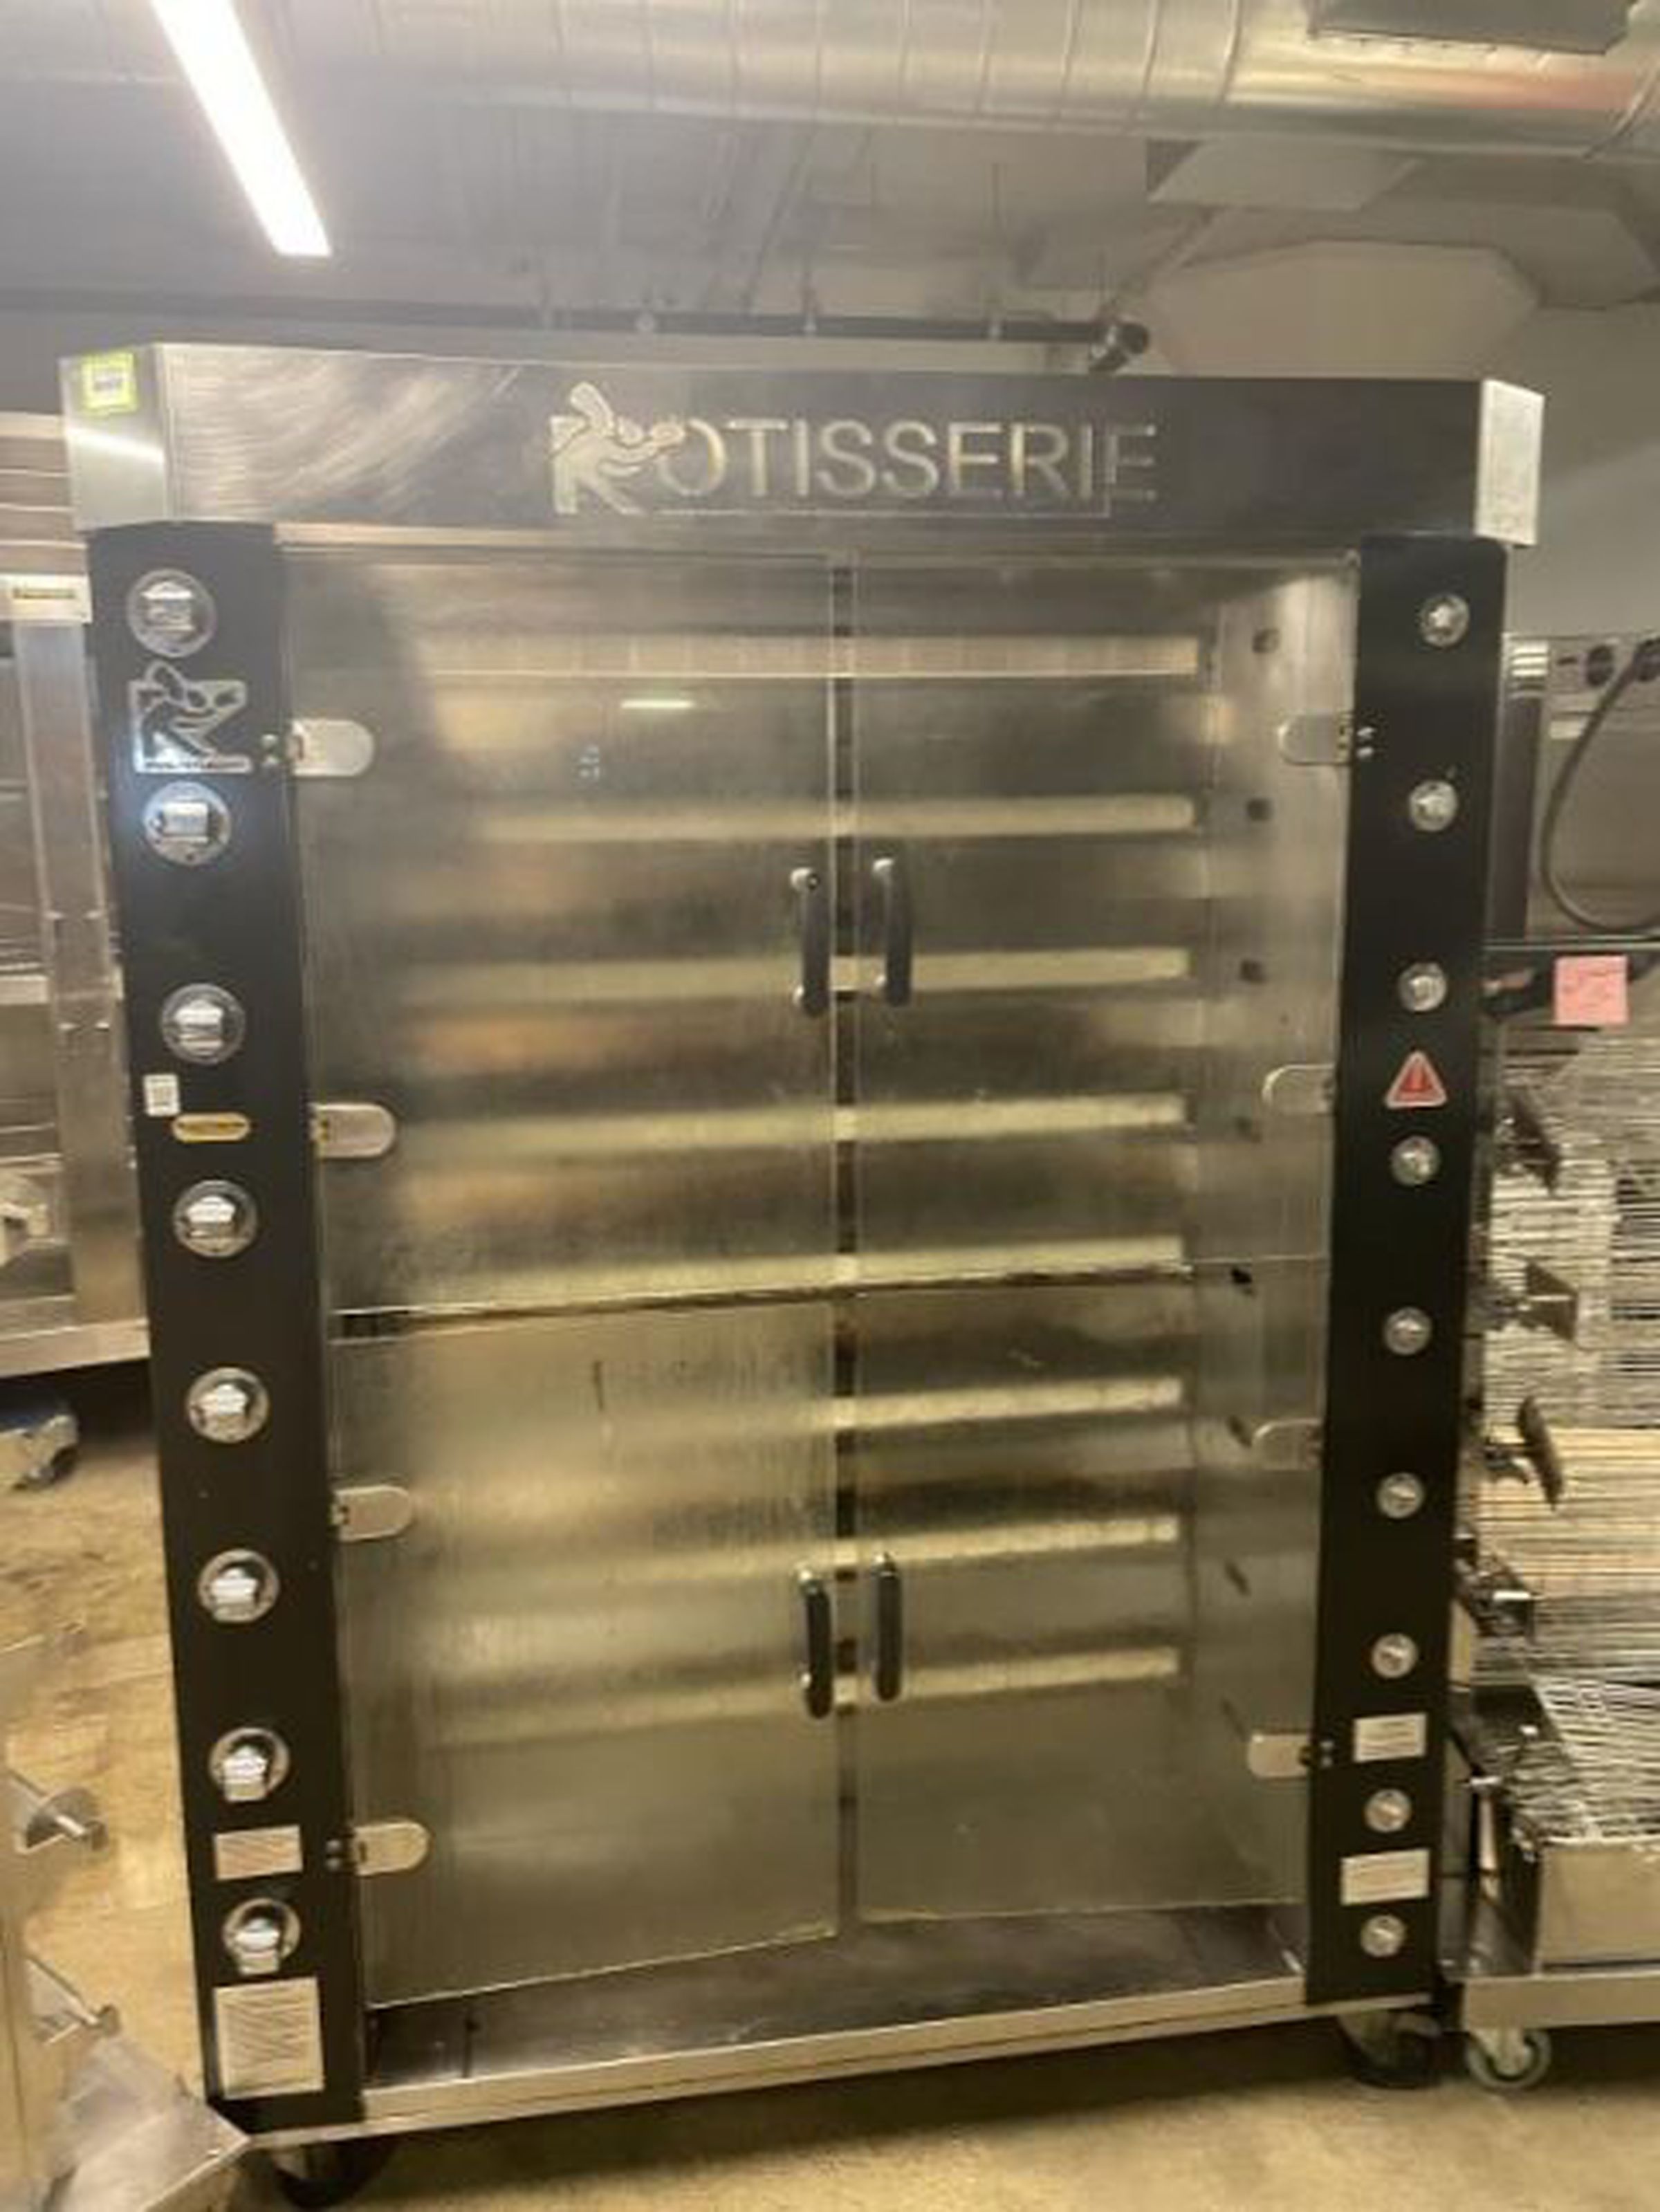 <em>Coffee machines, rotisserie ovens, and industrial griddles are also listed on the online auction.</em>